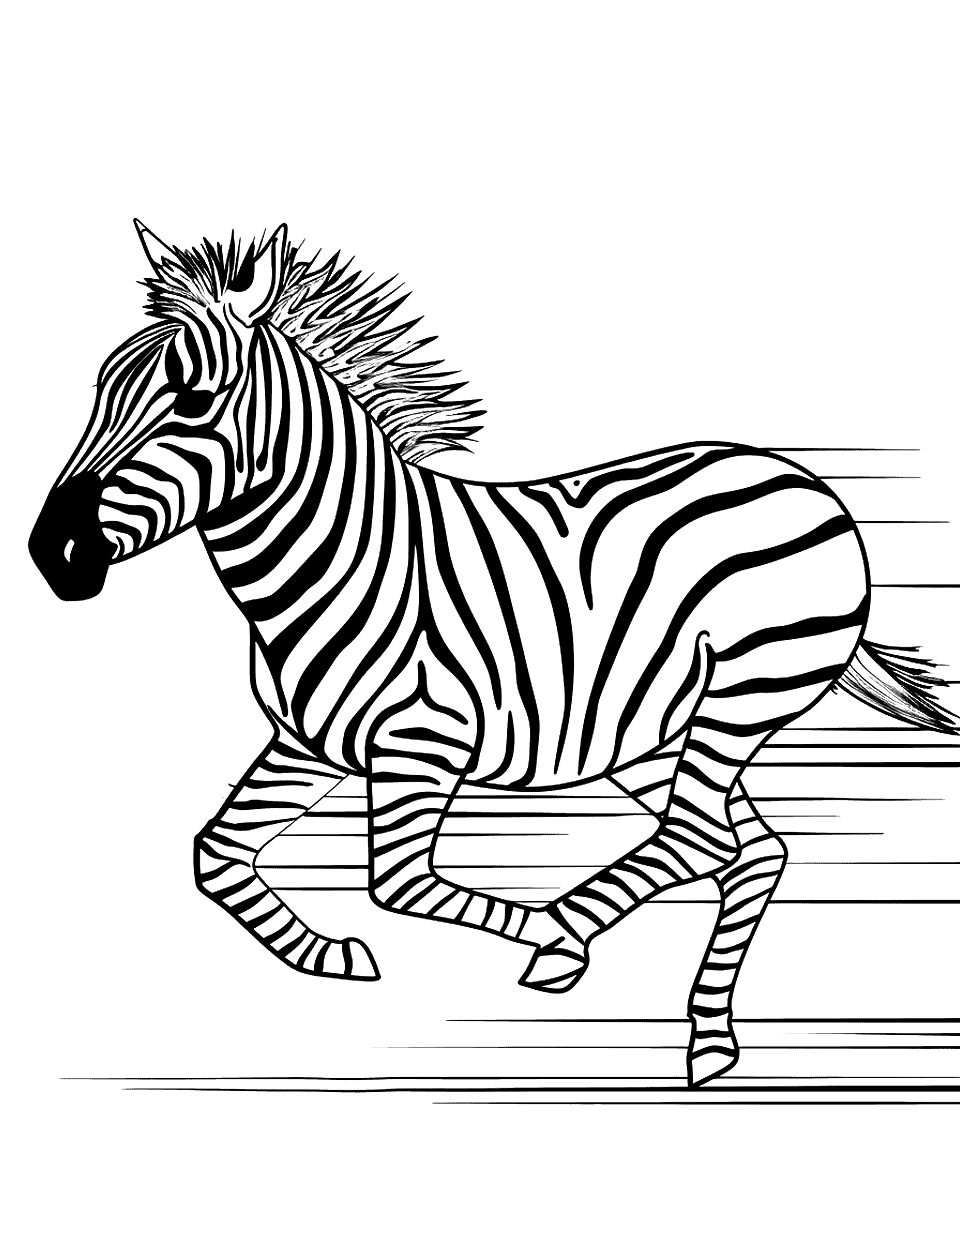 Running Zebra Coloring Page - A zebra in full sprint across the plains with a blur of speed lines behind it.